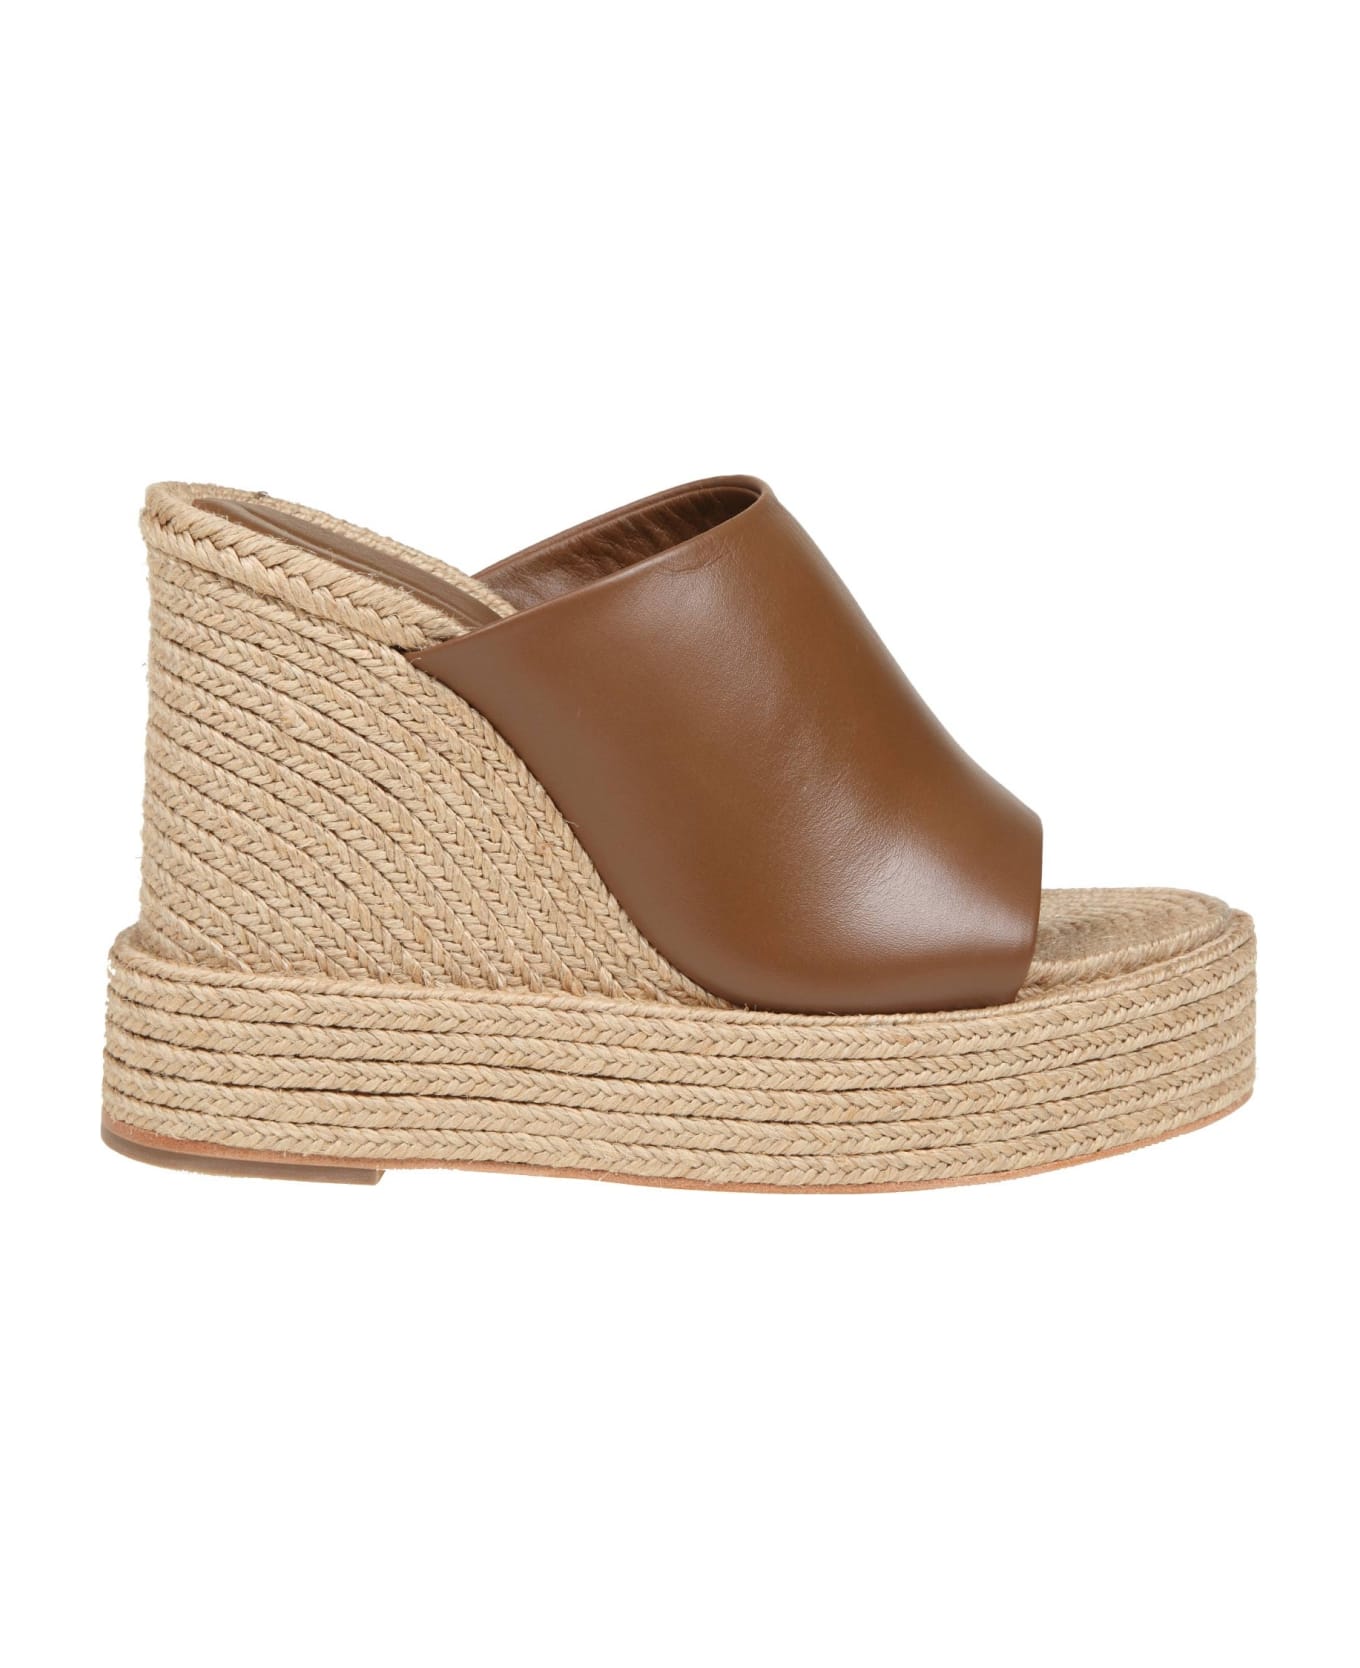 Paloma Barceló Camila Wedge Sandal In Leather Color - Leather サンダル